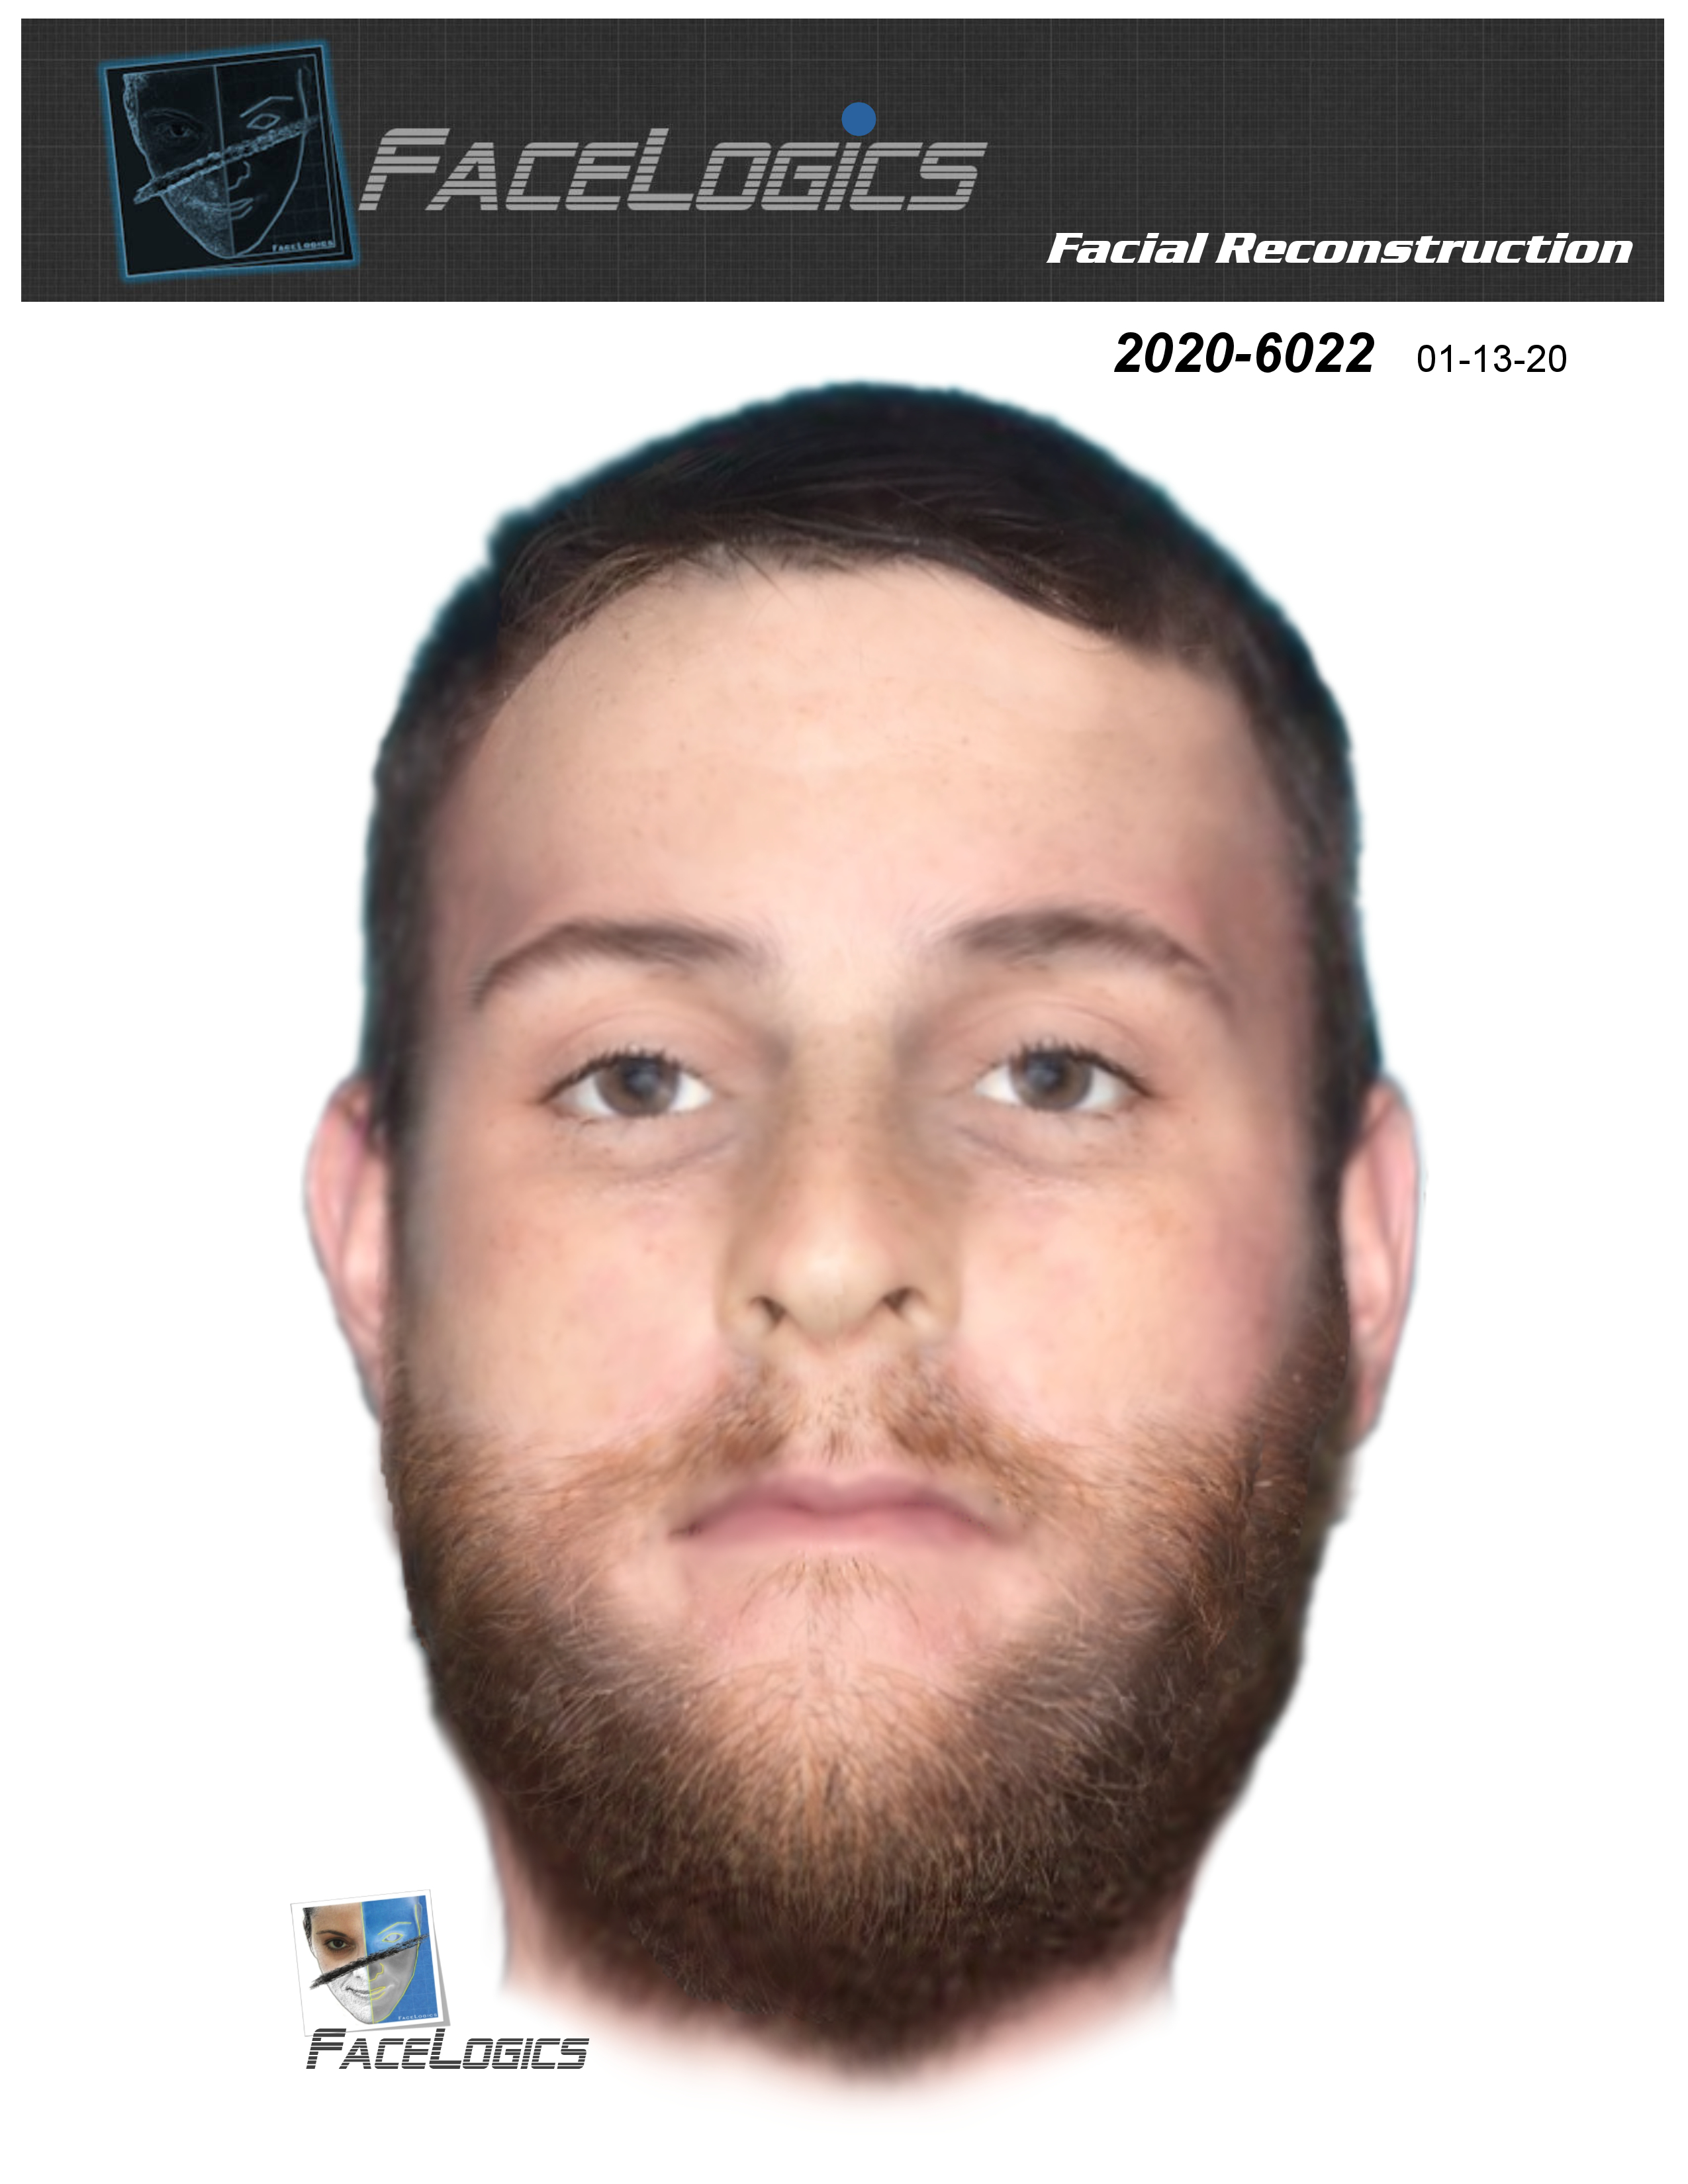 A reconstruction of the suspects face.